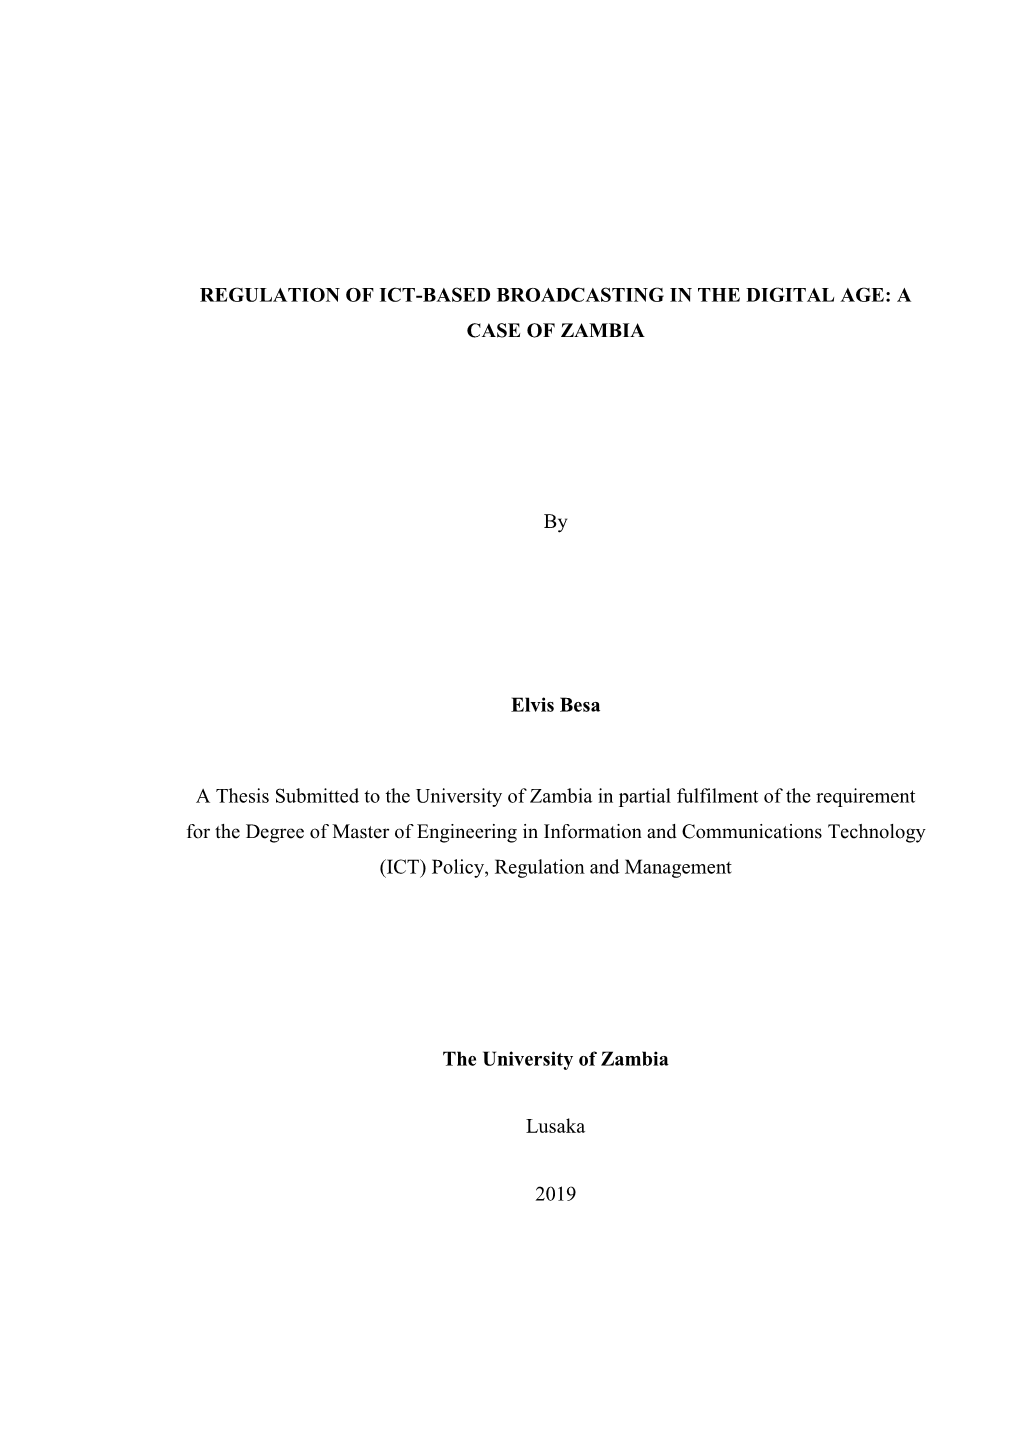 Regulation of Ict-Based Broadcasting in the Digital Age: A